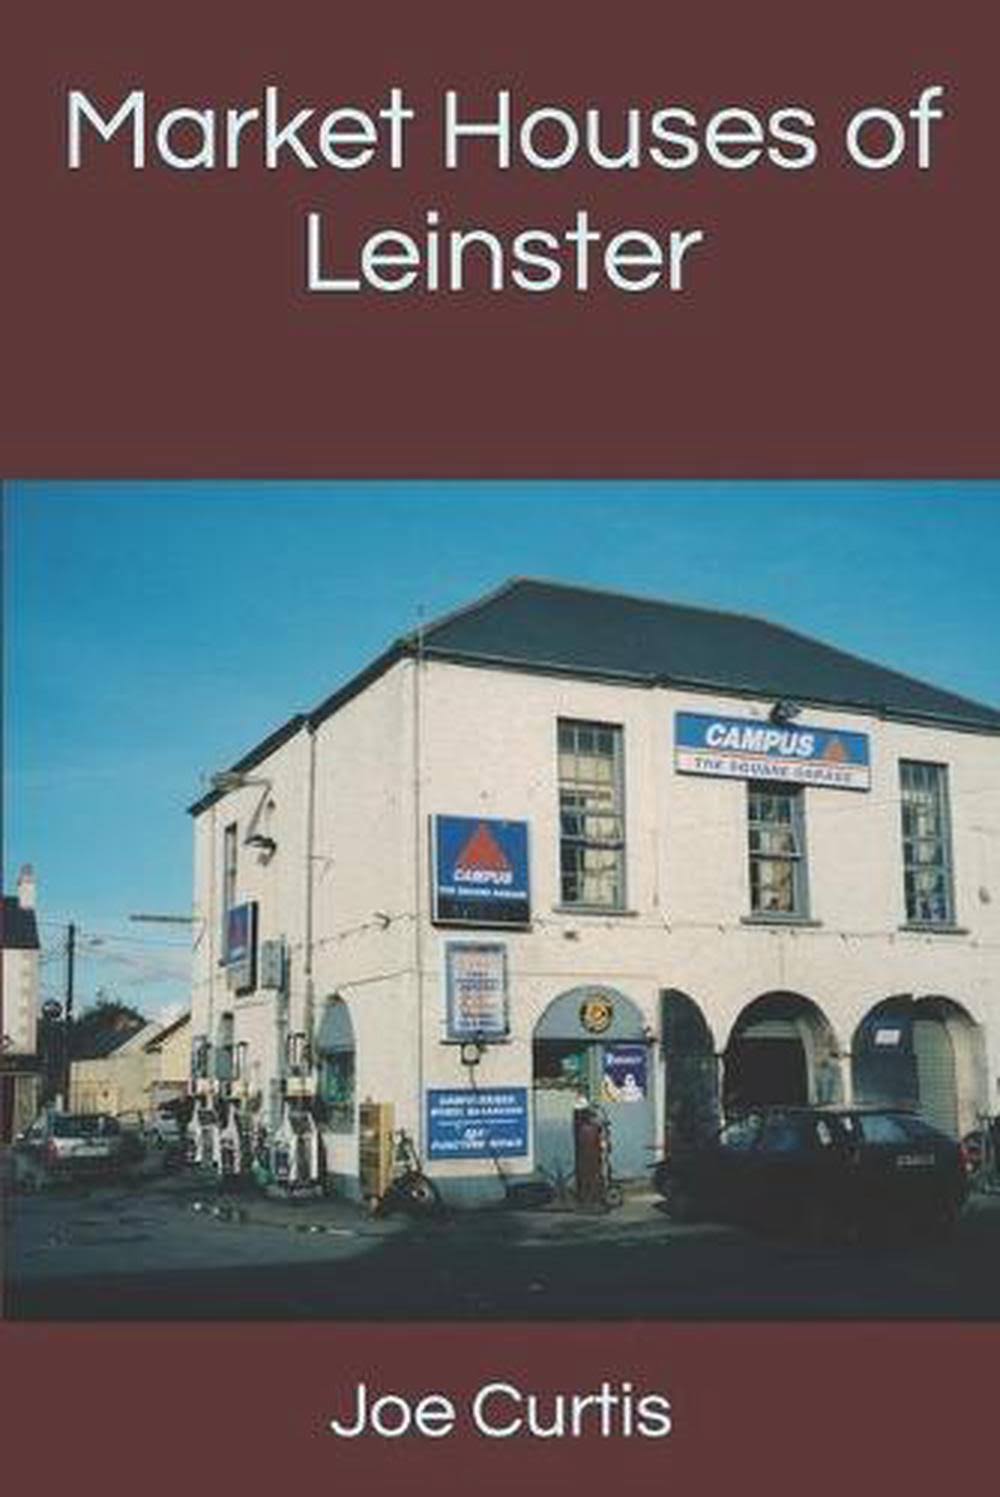 Market Houses of Leinster